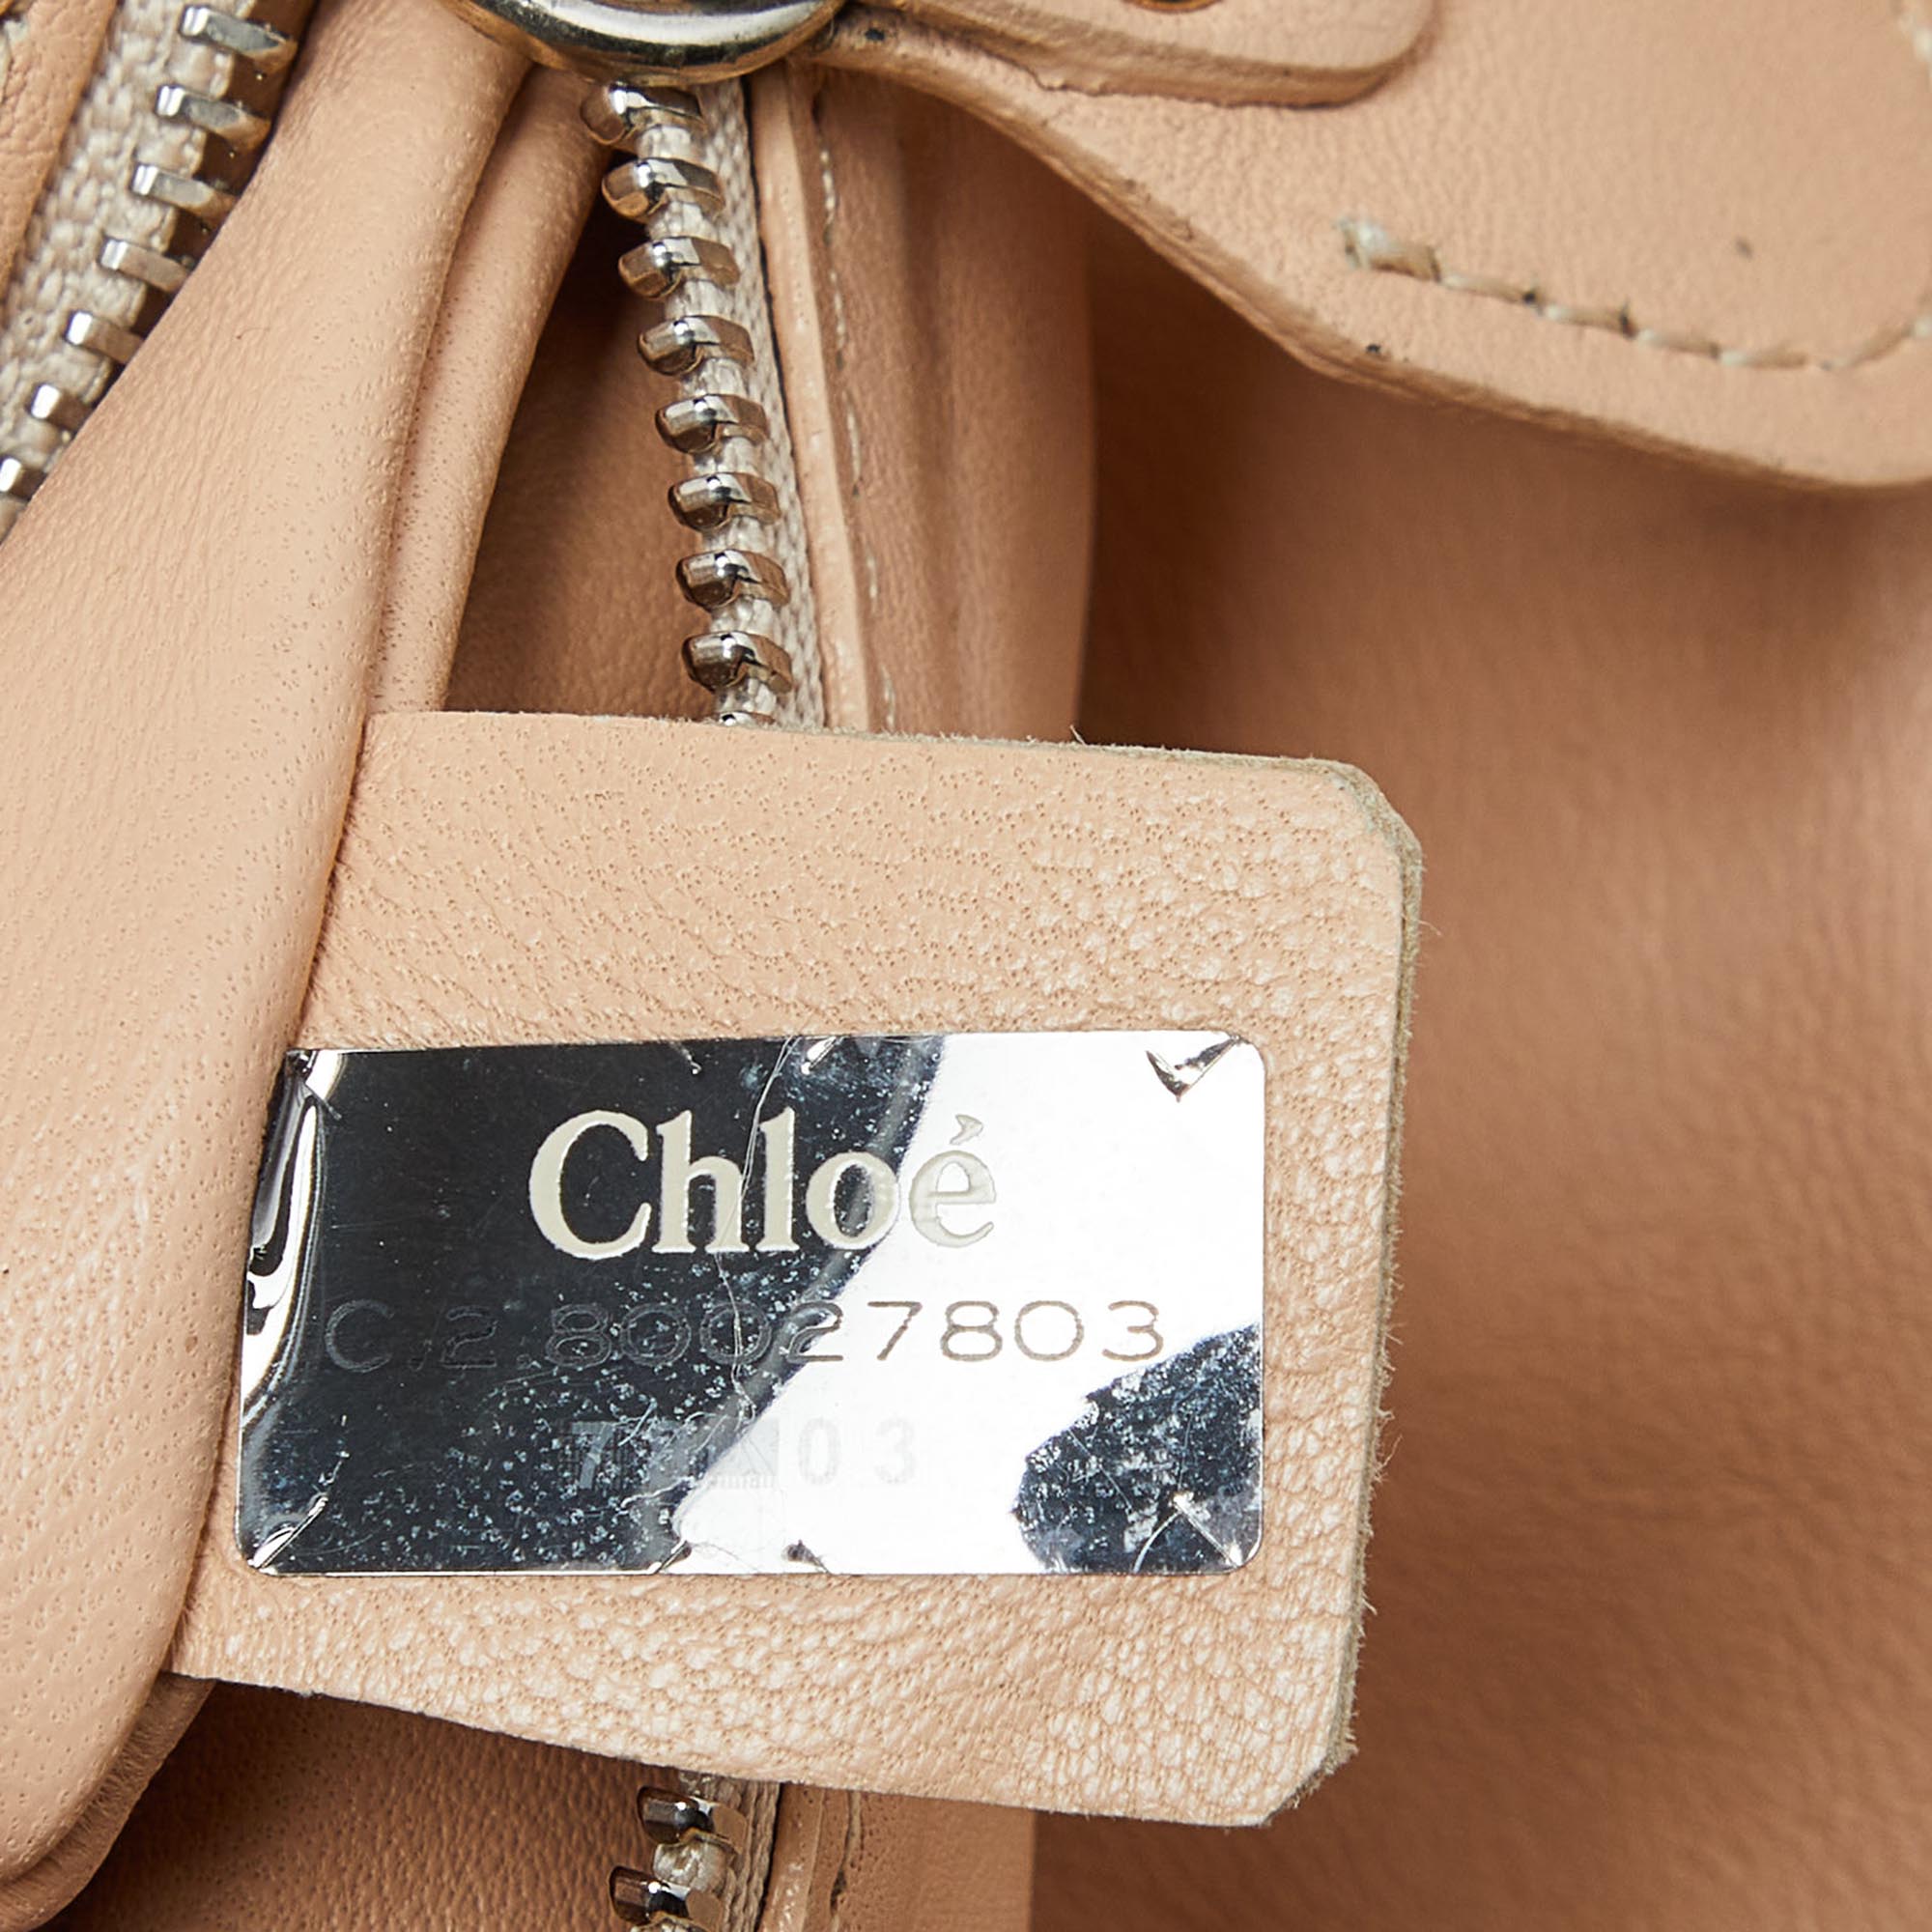 Chloe Green Patent And Leather Flap Crossbody Bag